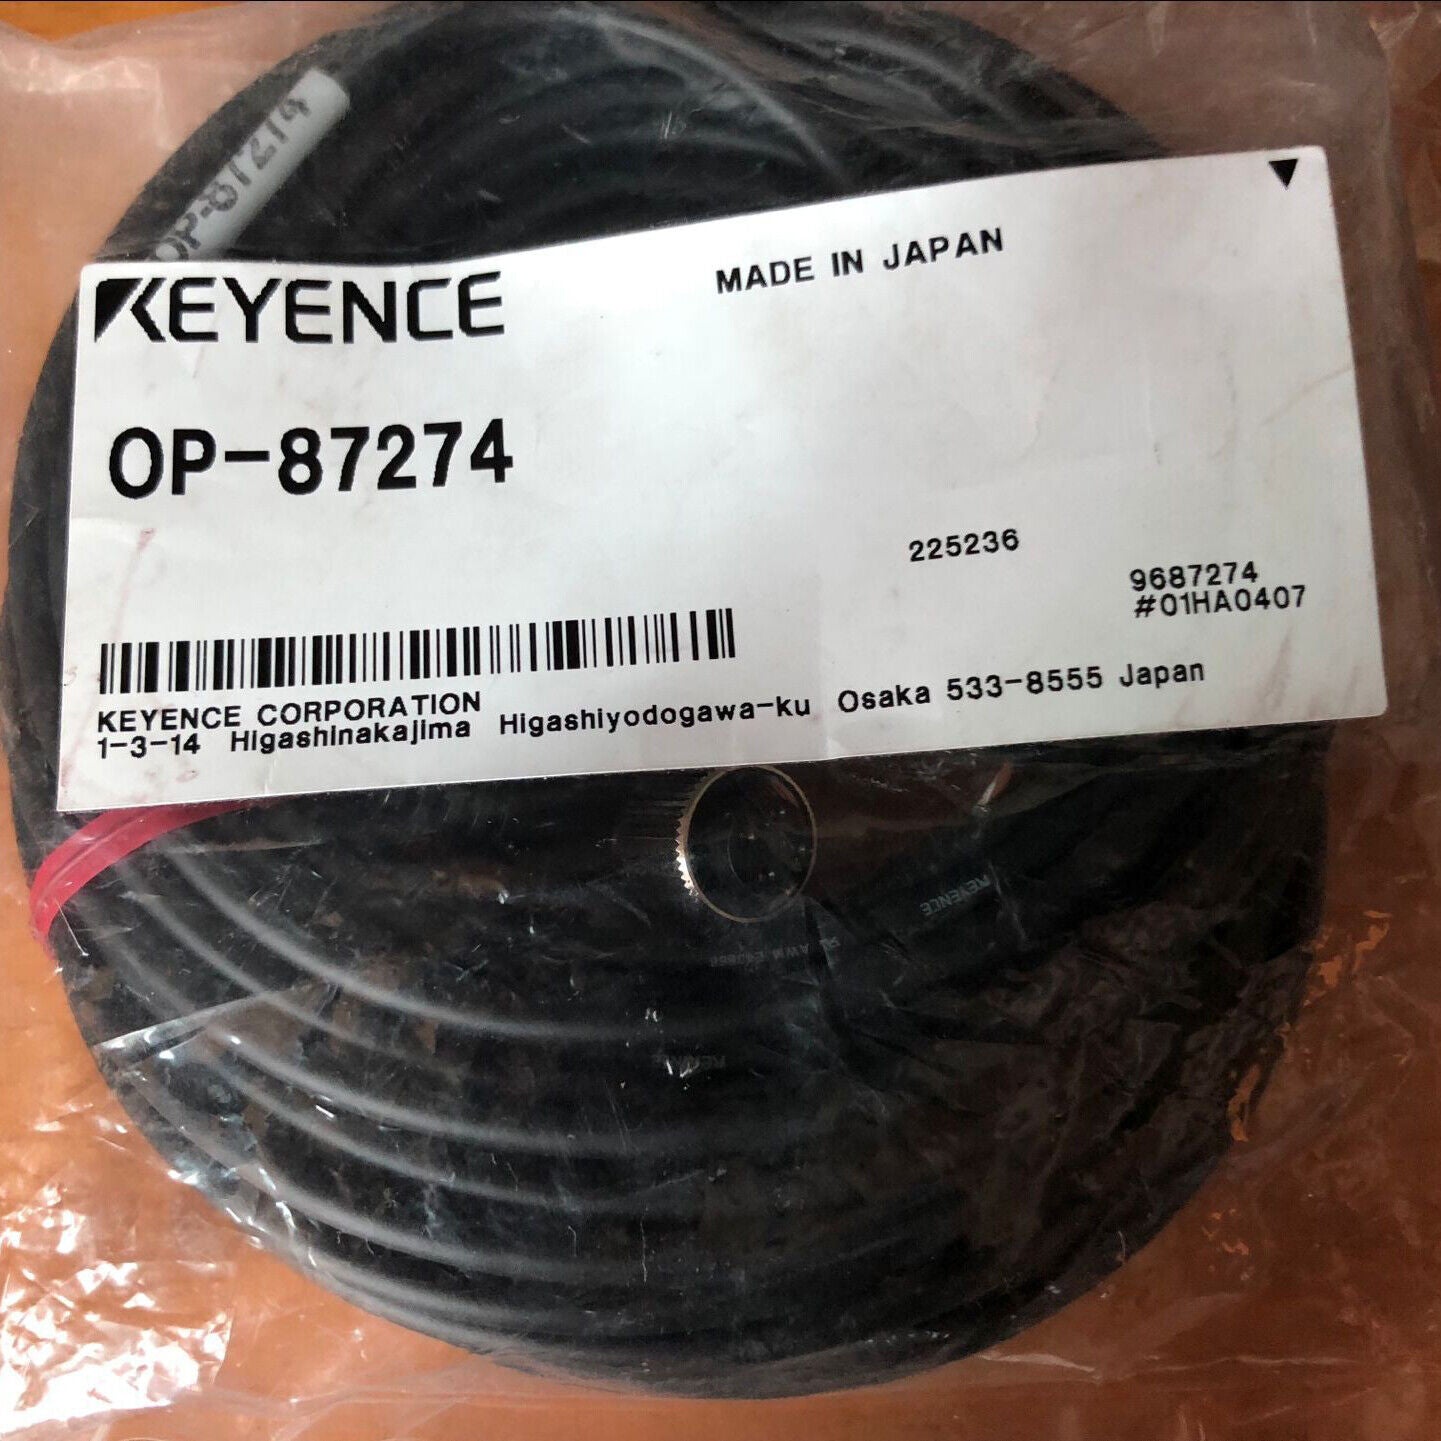 new ONE  For KEYENCE OP-87274 Accessories Cable OP-87274